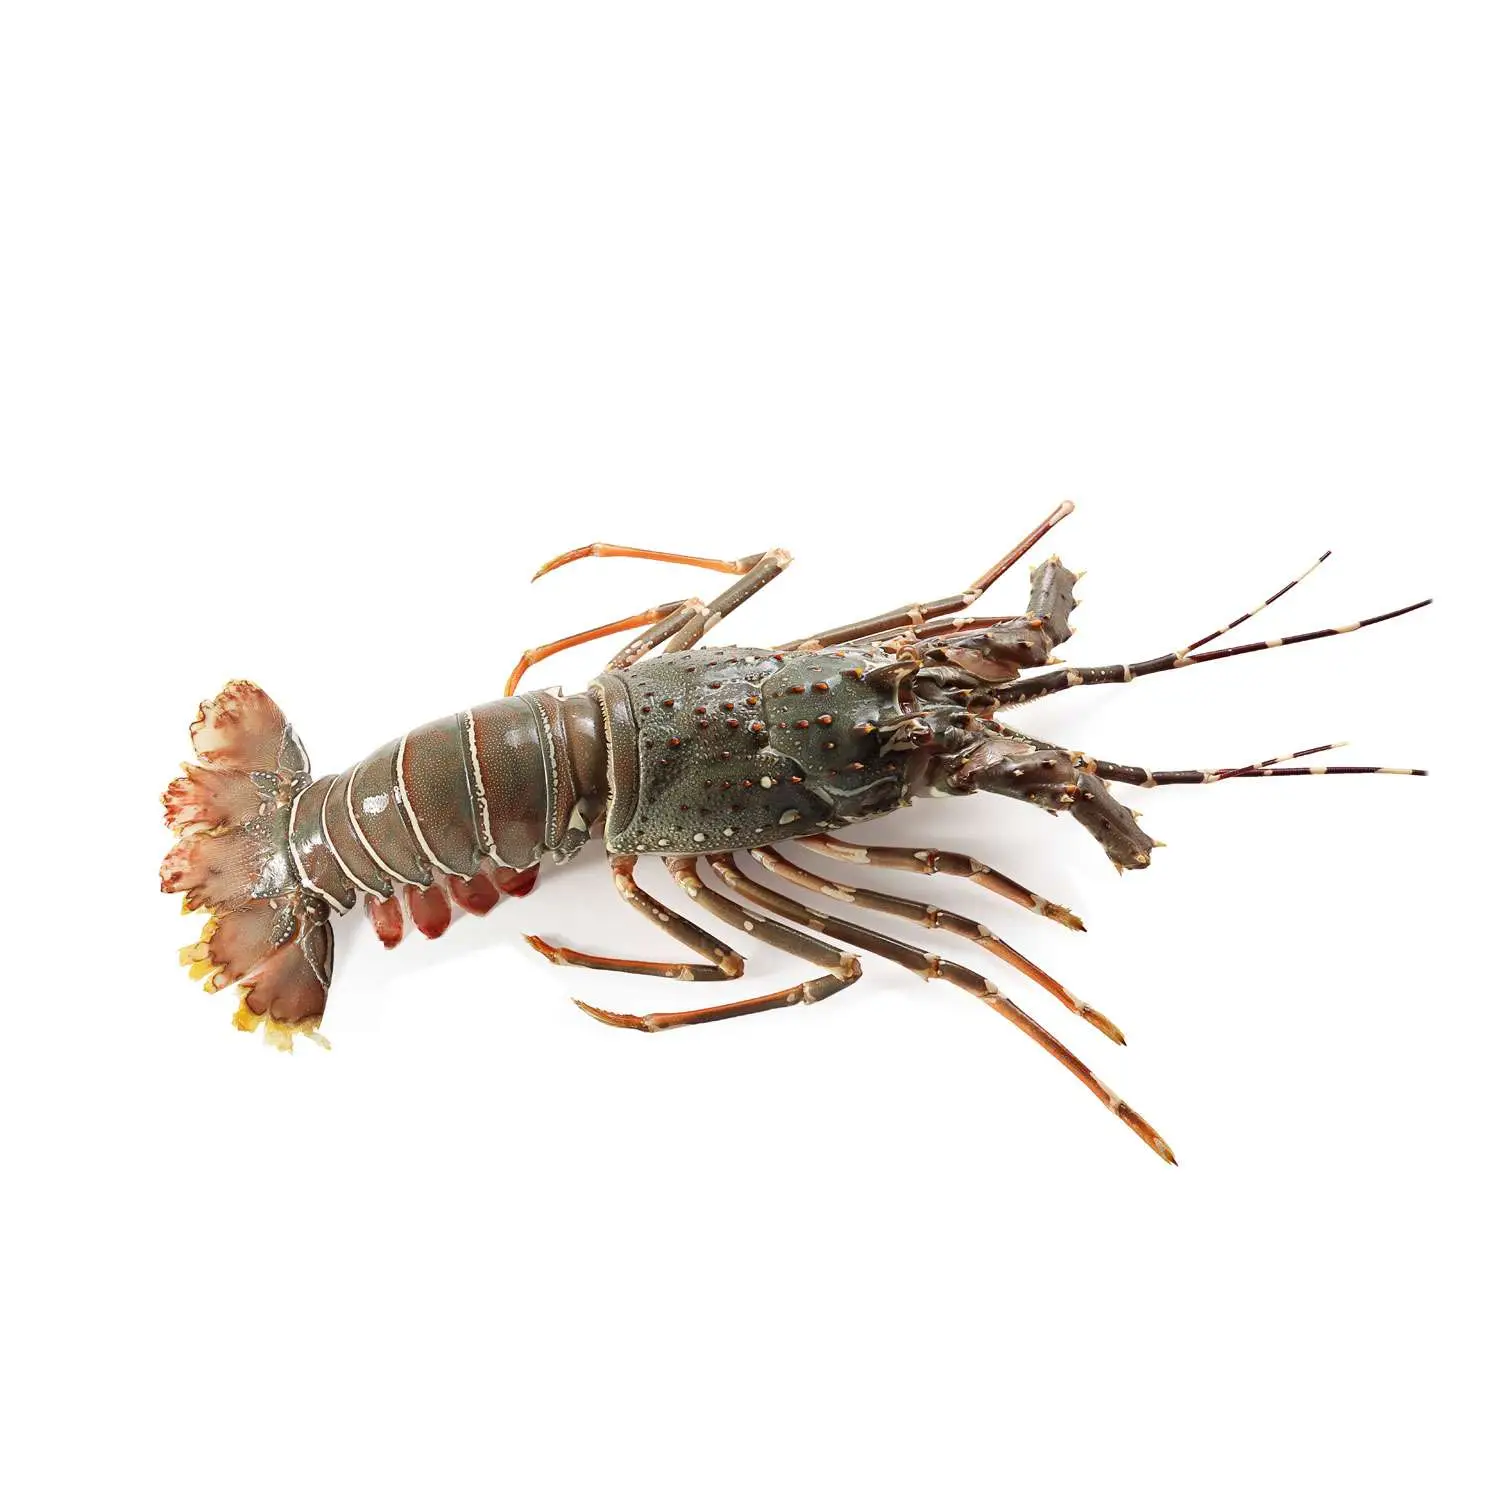 Indoseas, a leading exporter of premium seafood, provides live premium seafood: Bamboo Lobster.